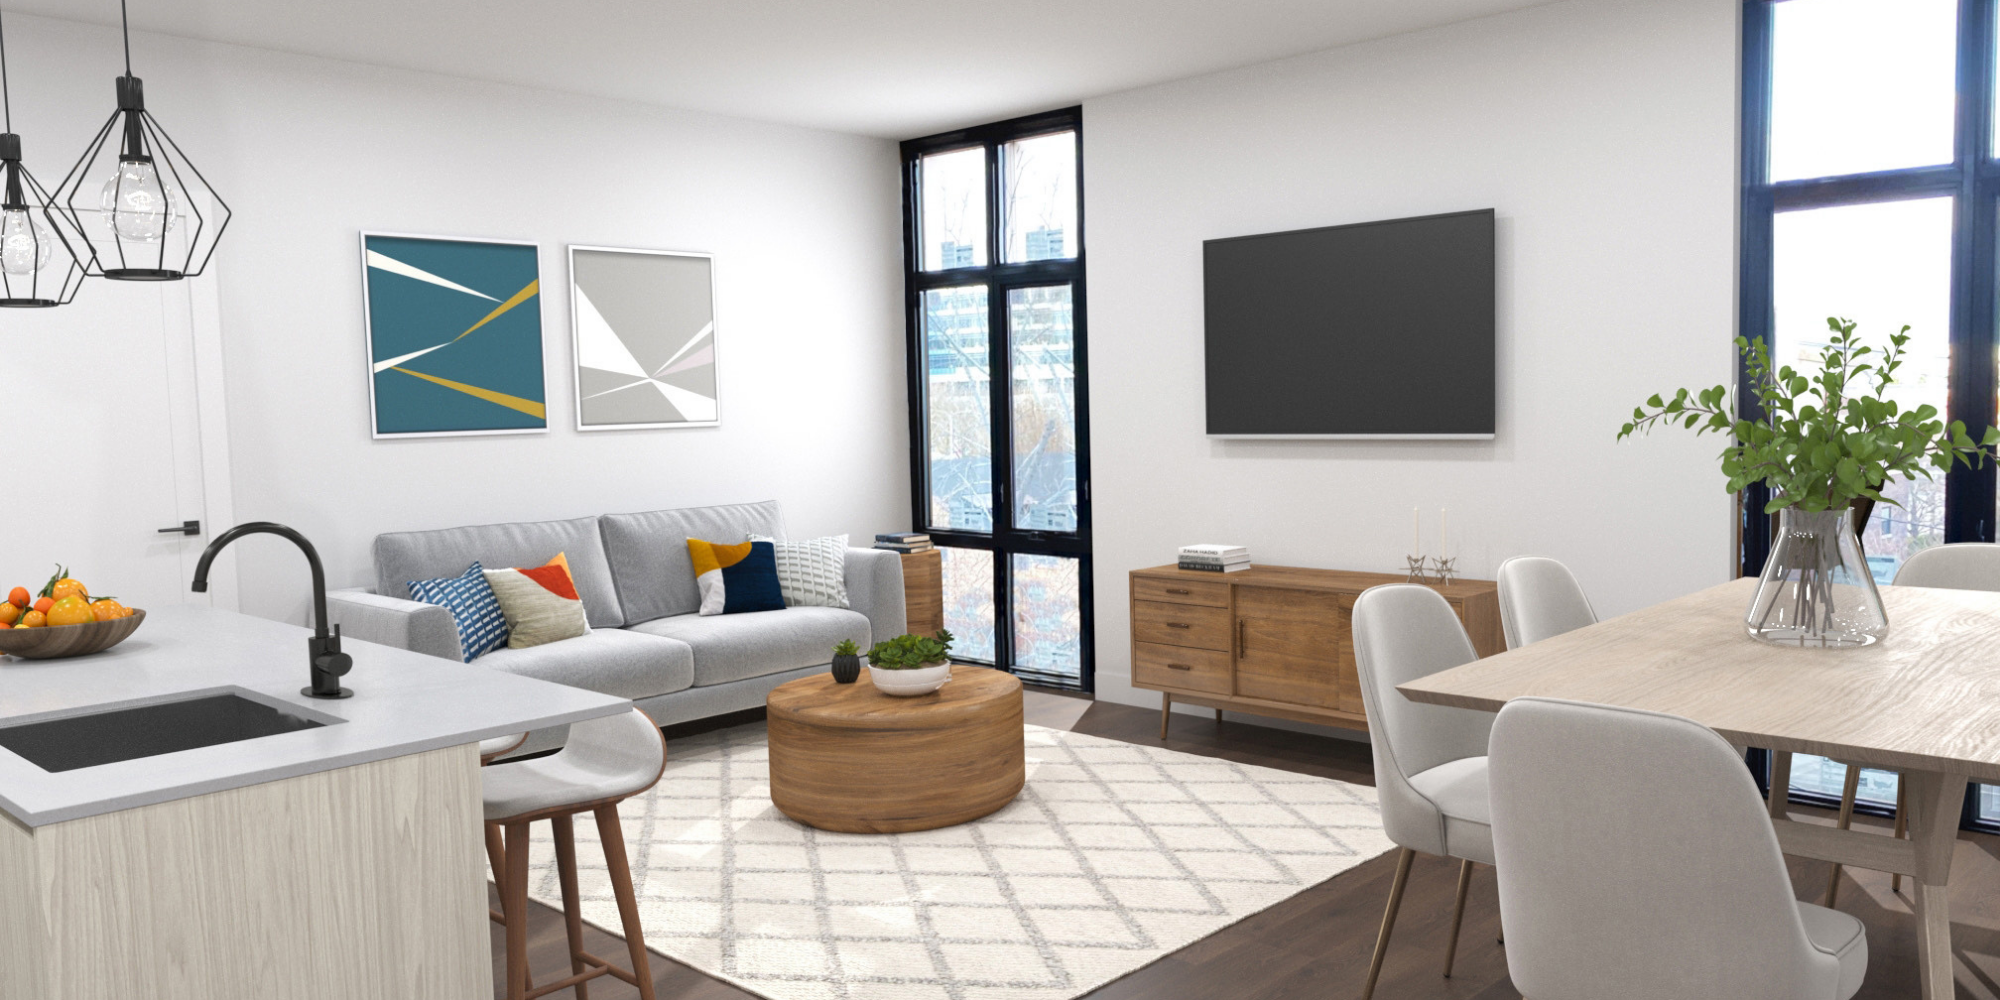 Introducing Gallery Residences at Arthaus Allston - New Luxury Condos